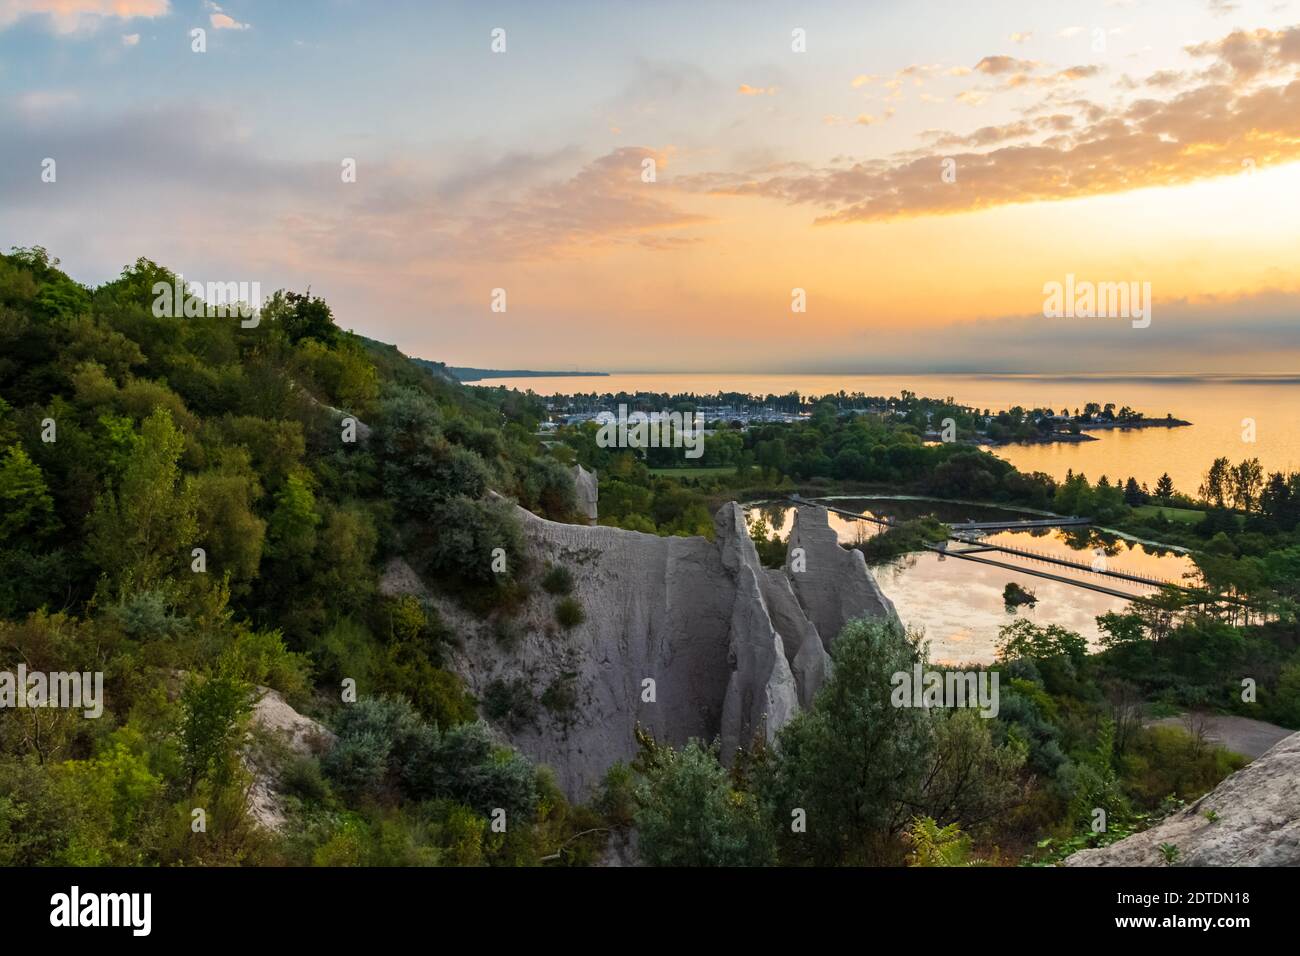 Bluffers Park Scarborough Bluffs Conservation Area Scarborough Toronto Ontario Canada early sunrise summer Stock Photo